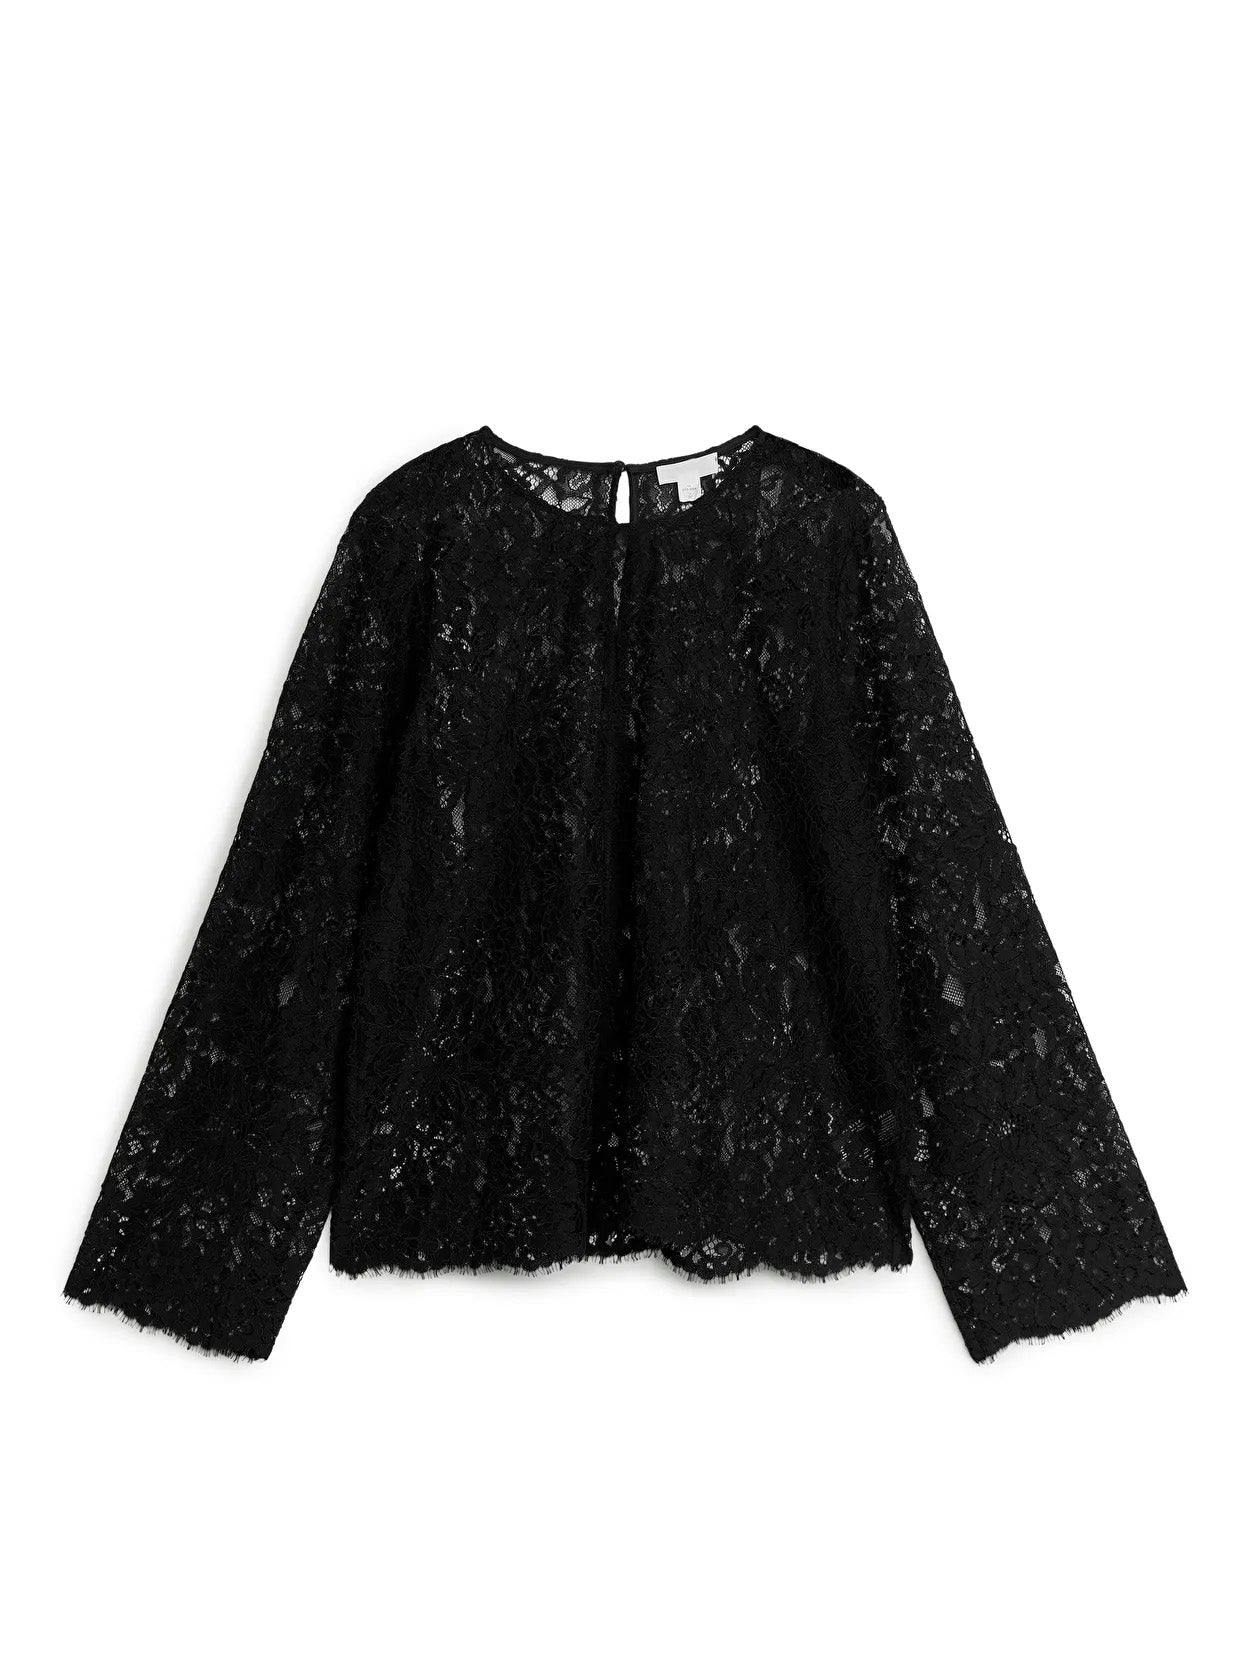 Black lace long-sleeved blouse